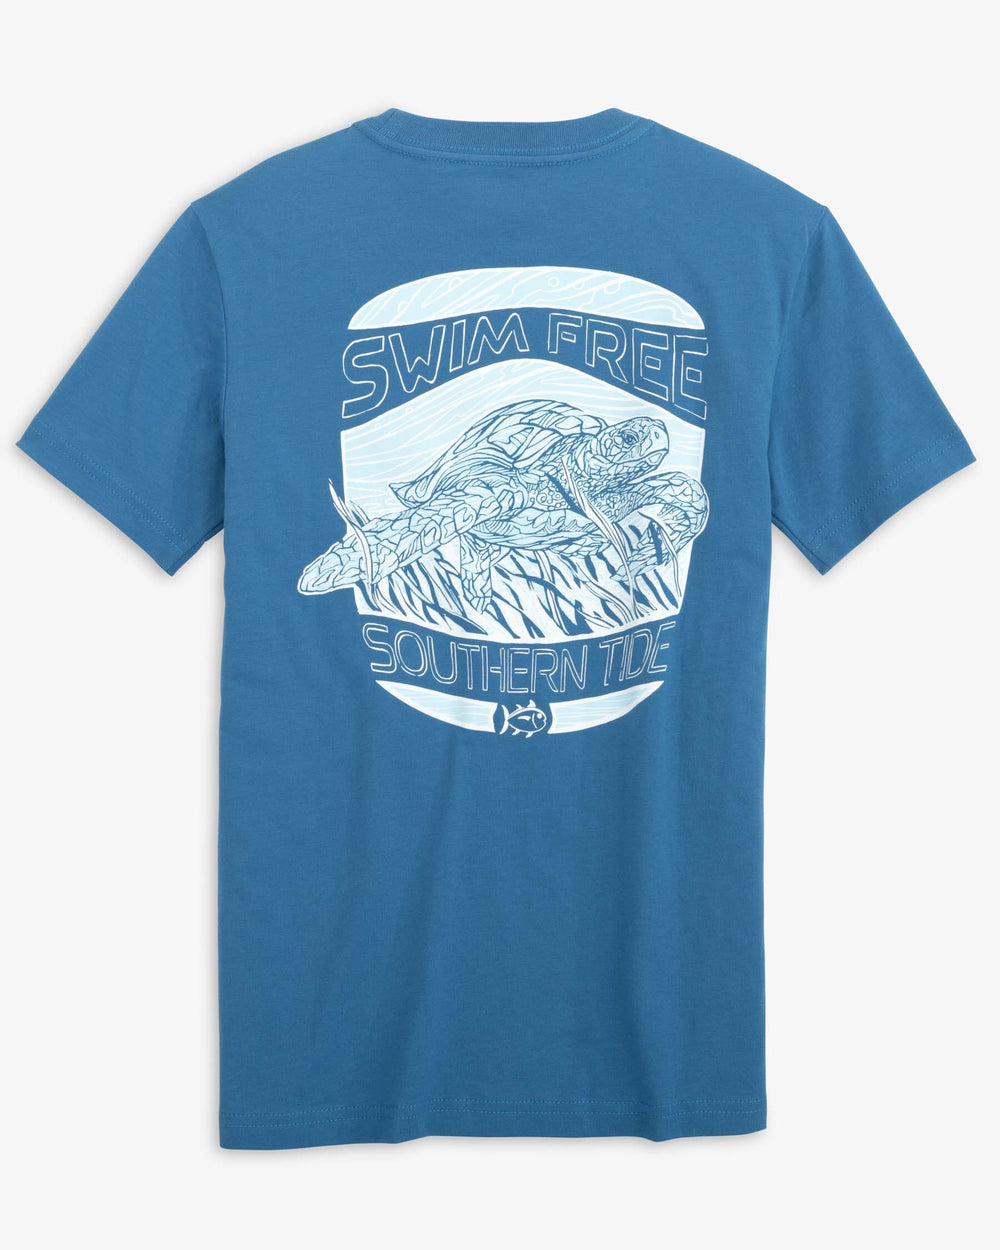 The back view of the Southern Tide Kids Swim Free T-shirt by Southern Tide - Atlantic Blue